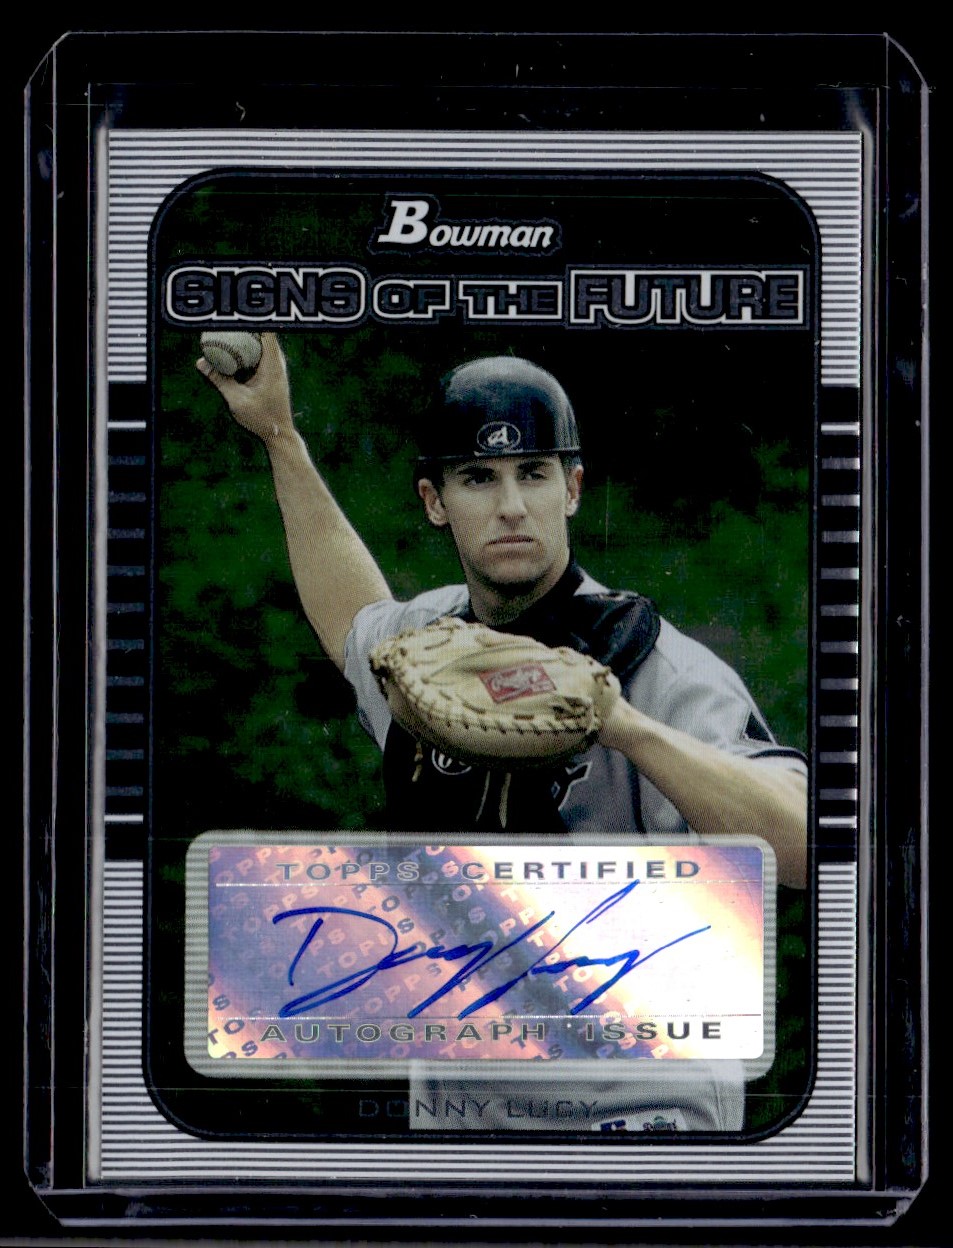 2005 Bowman Draft Picks & Prospects Signs of the Future Donald Lucy #SOF-DL card front image